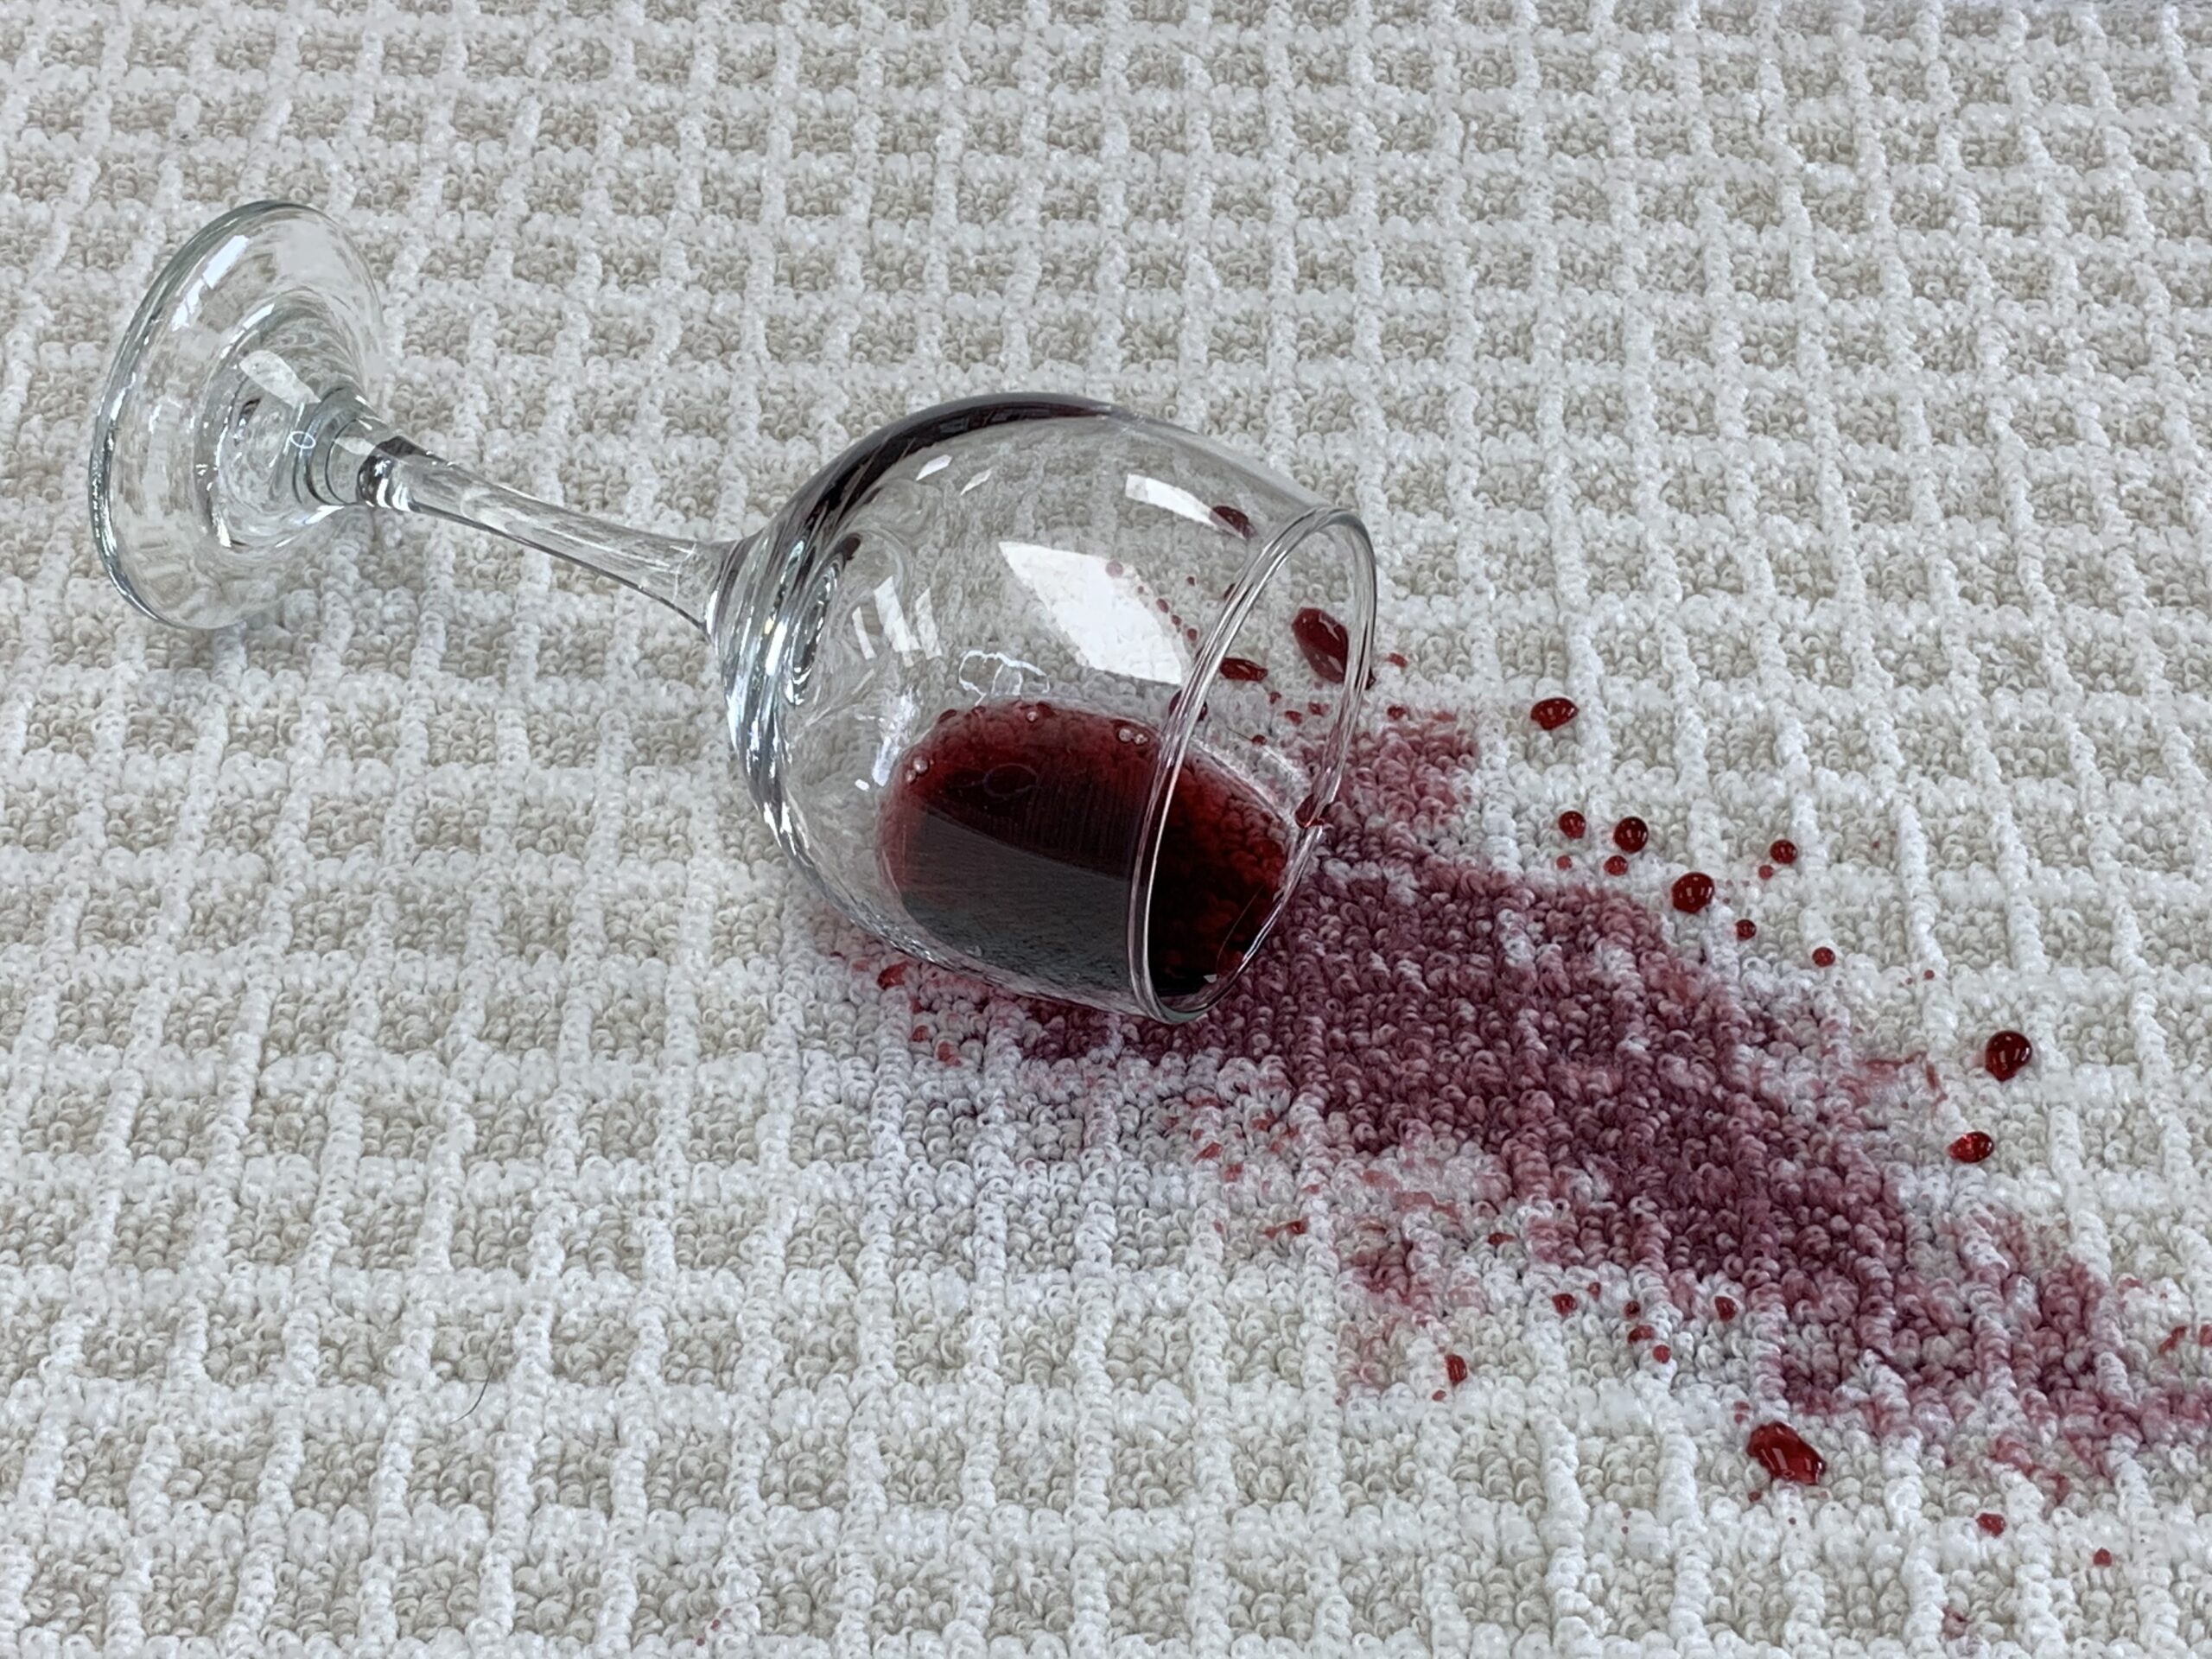 Red wine is splattered across a textured white carpet.